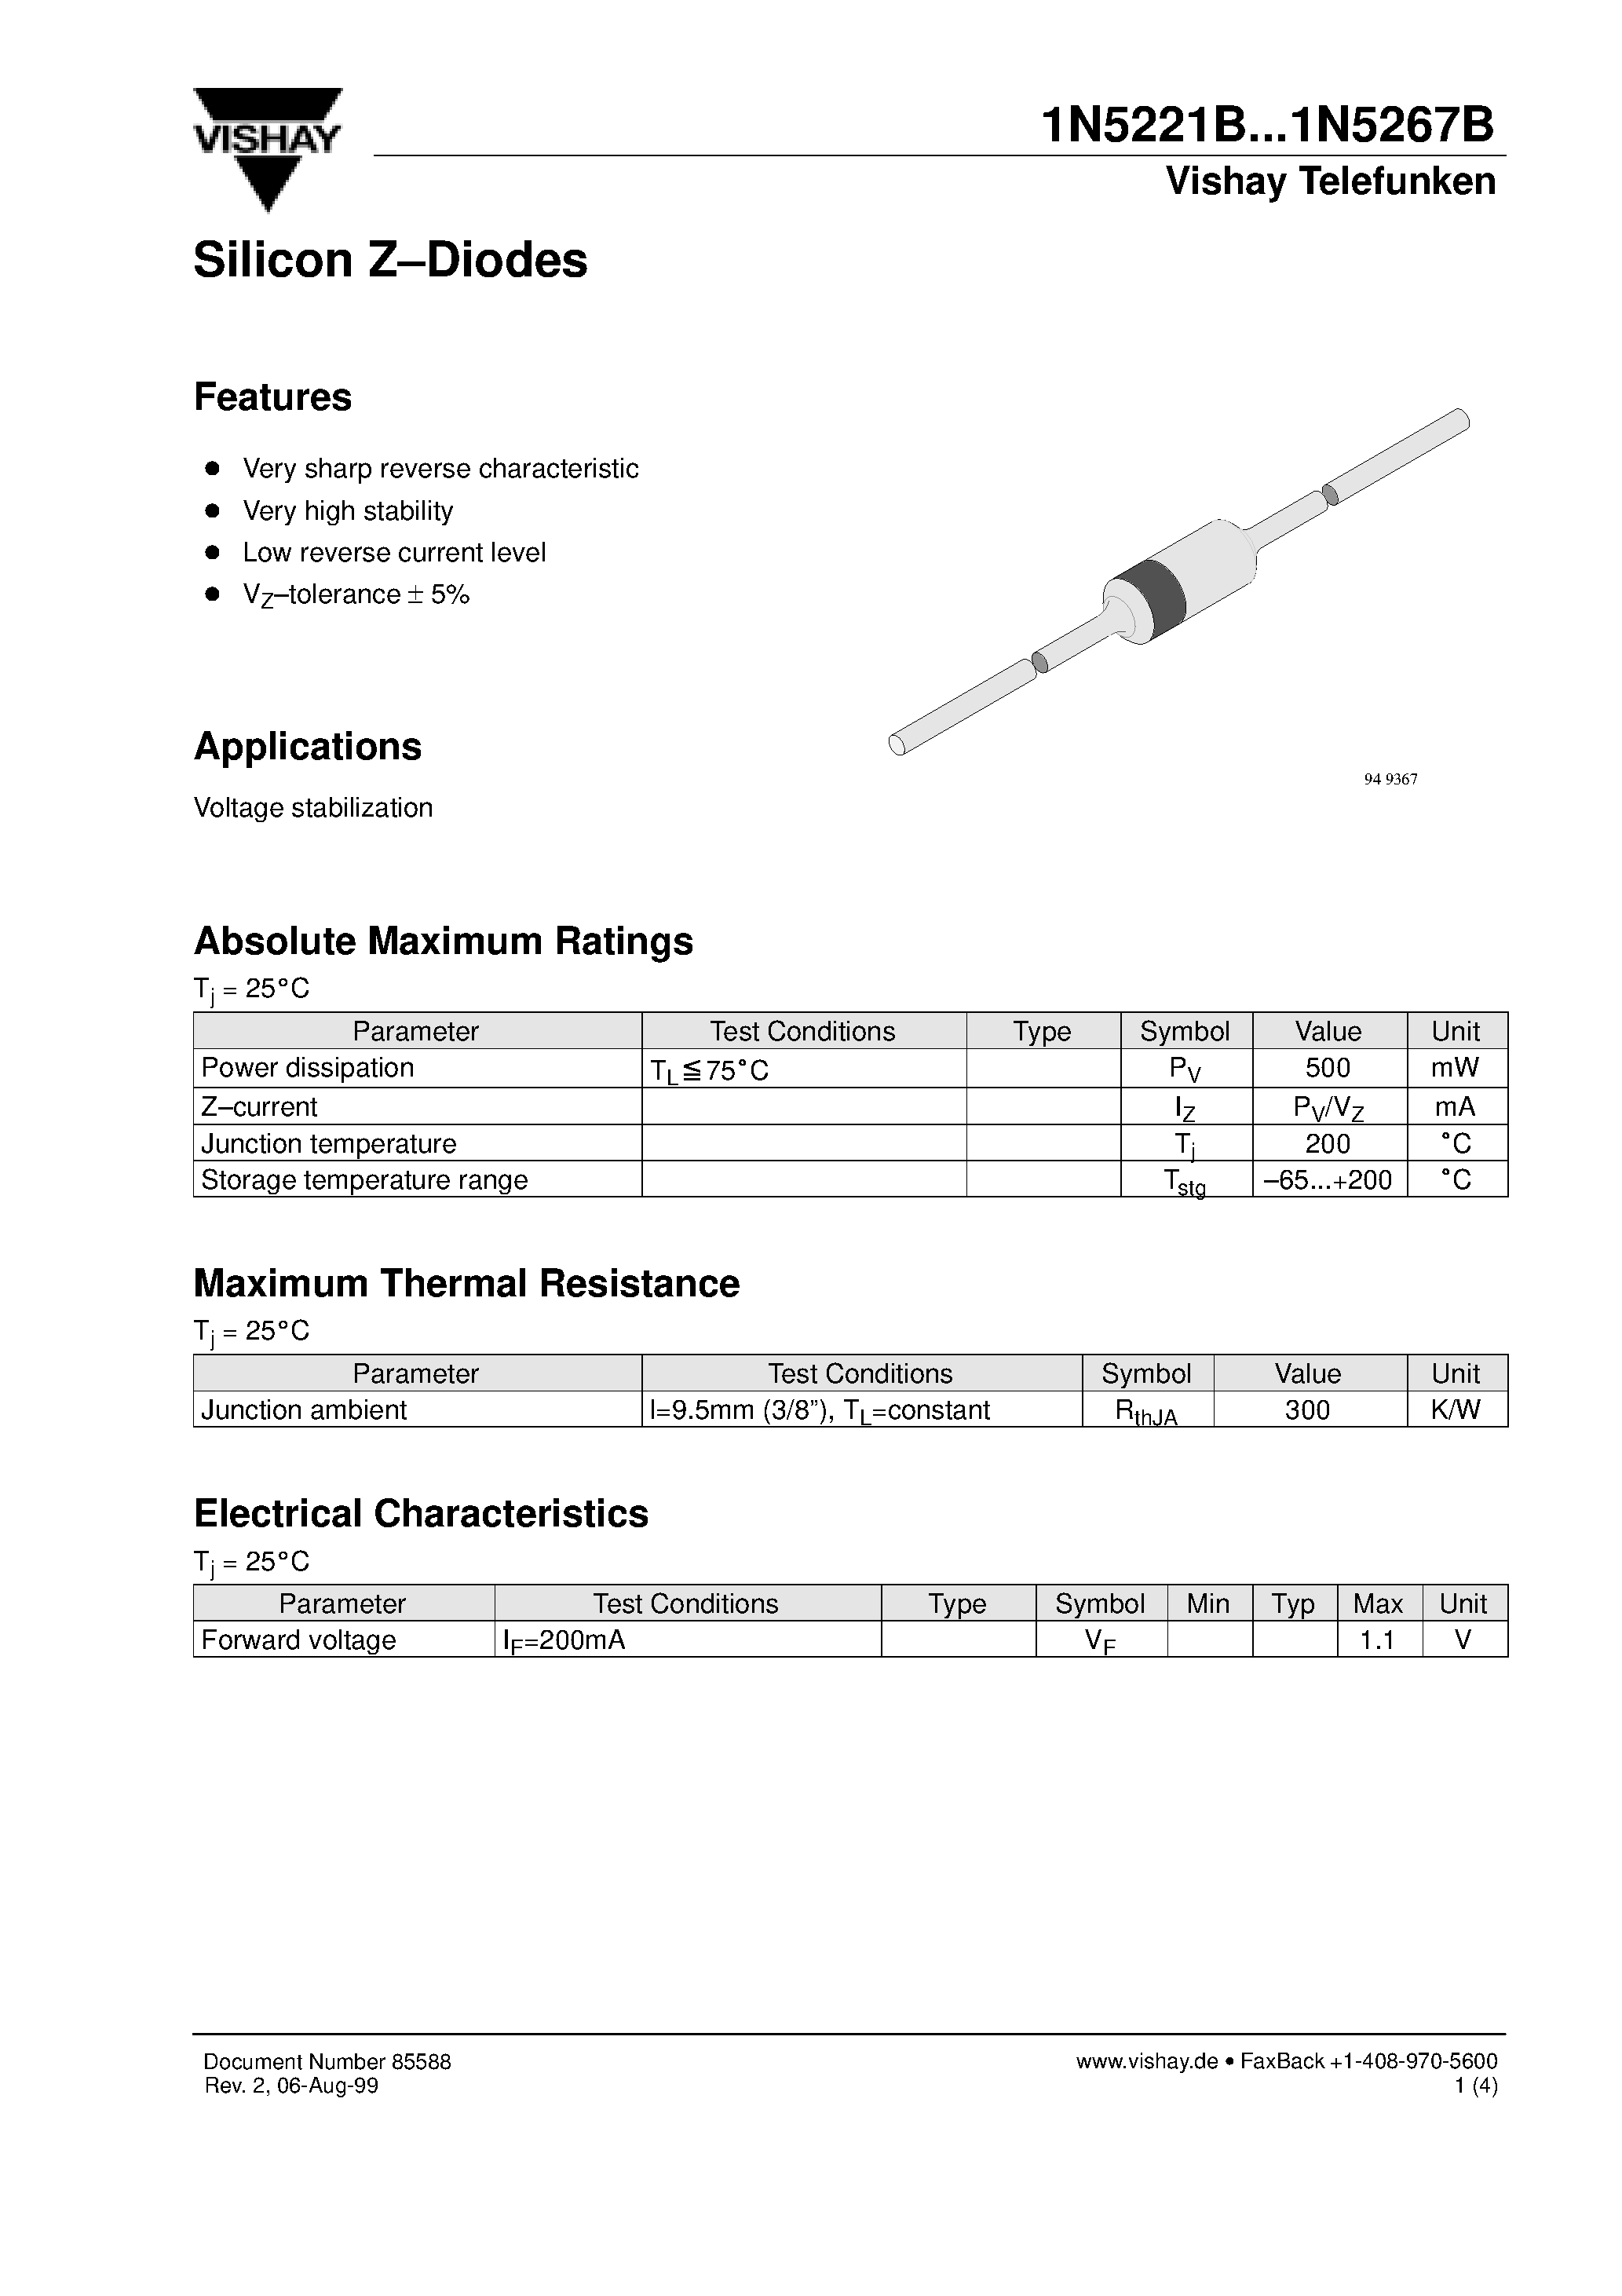 Datasheet 1N5259B - Silicon Z-Diodes page 1